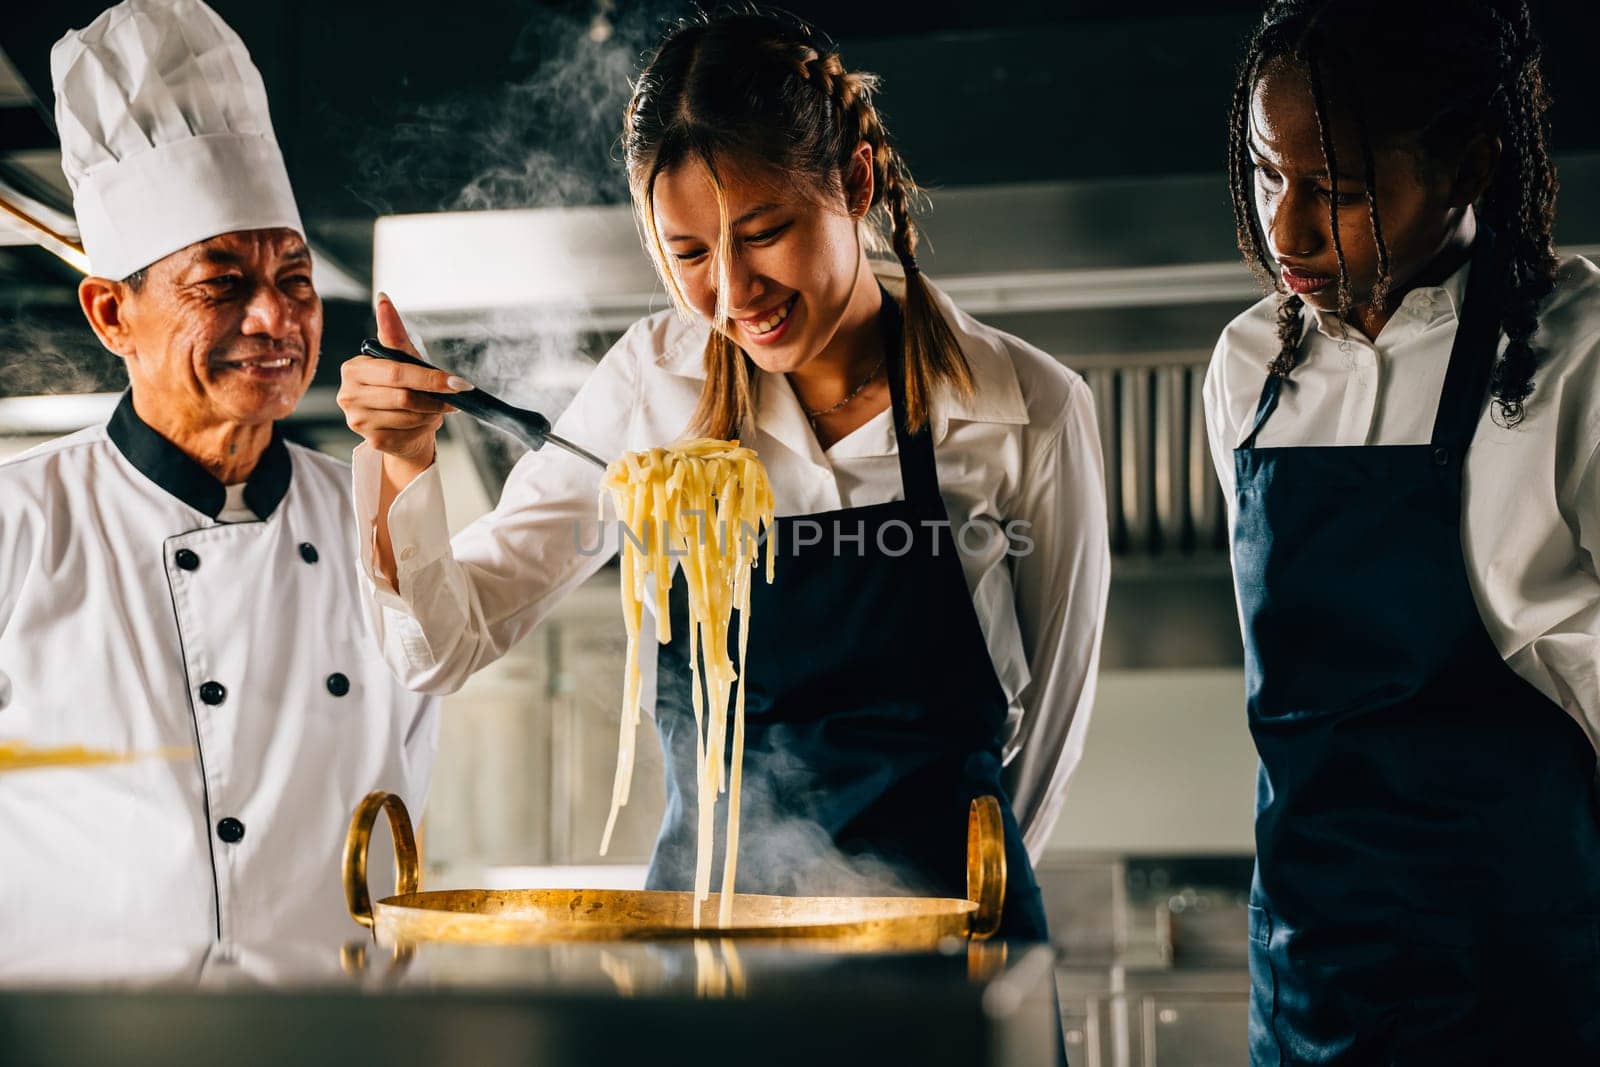 Chef instructs kids cooking noodle in kitchen. Schoolgirls in uniform create ramen soup. Teacher guides smiling students. Modern education seen in making dinner. Foor Education Concept by Sorapop